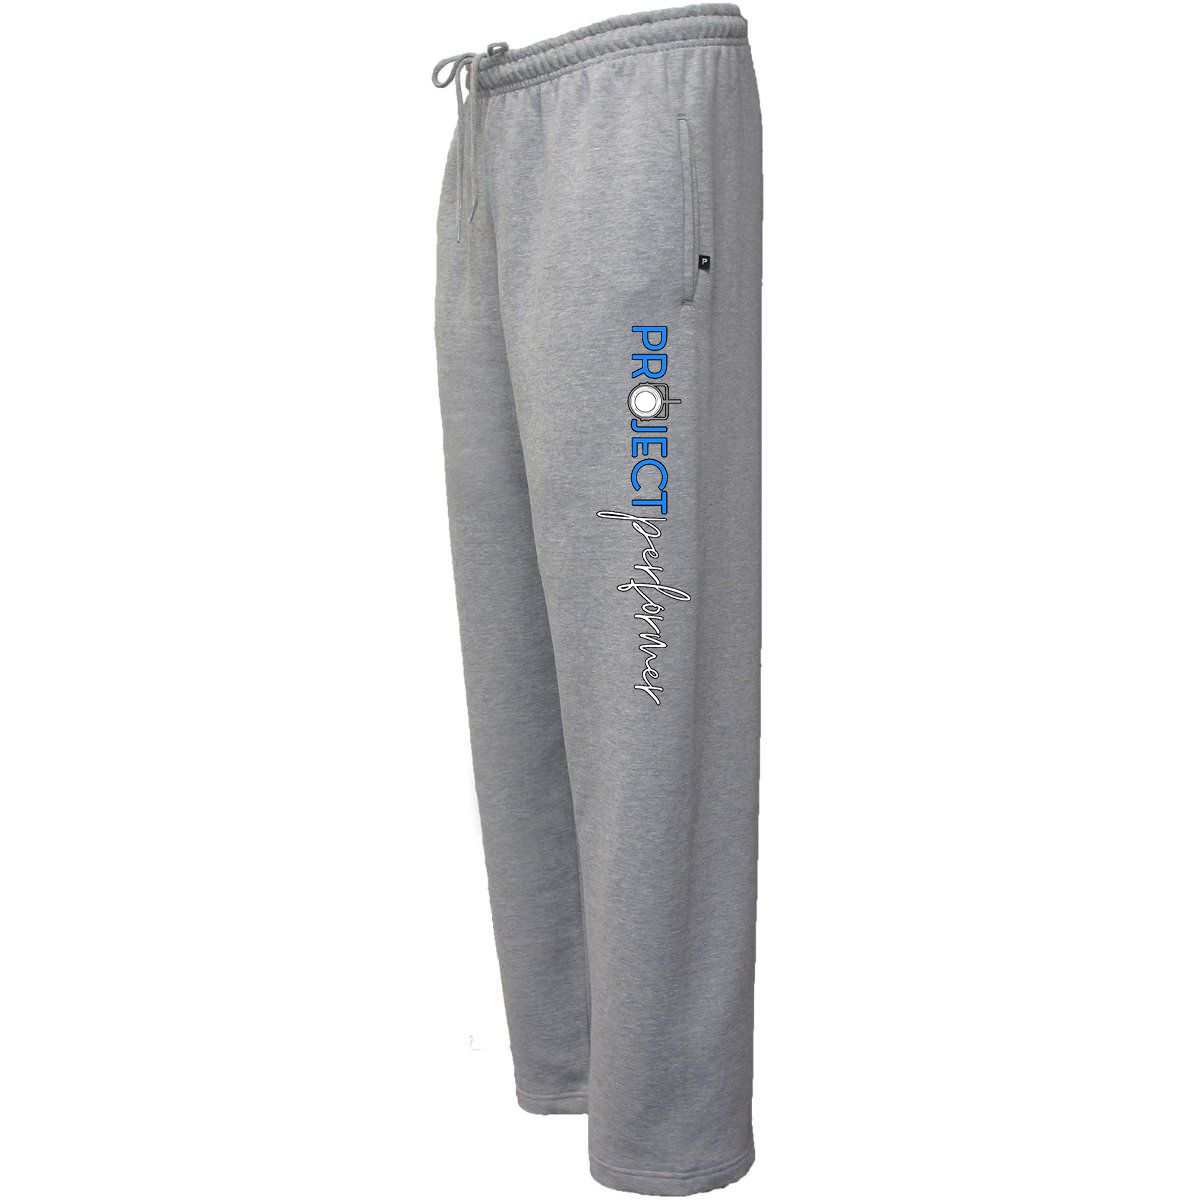 Project Performer Sweatpants